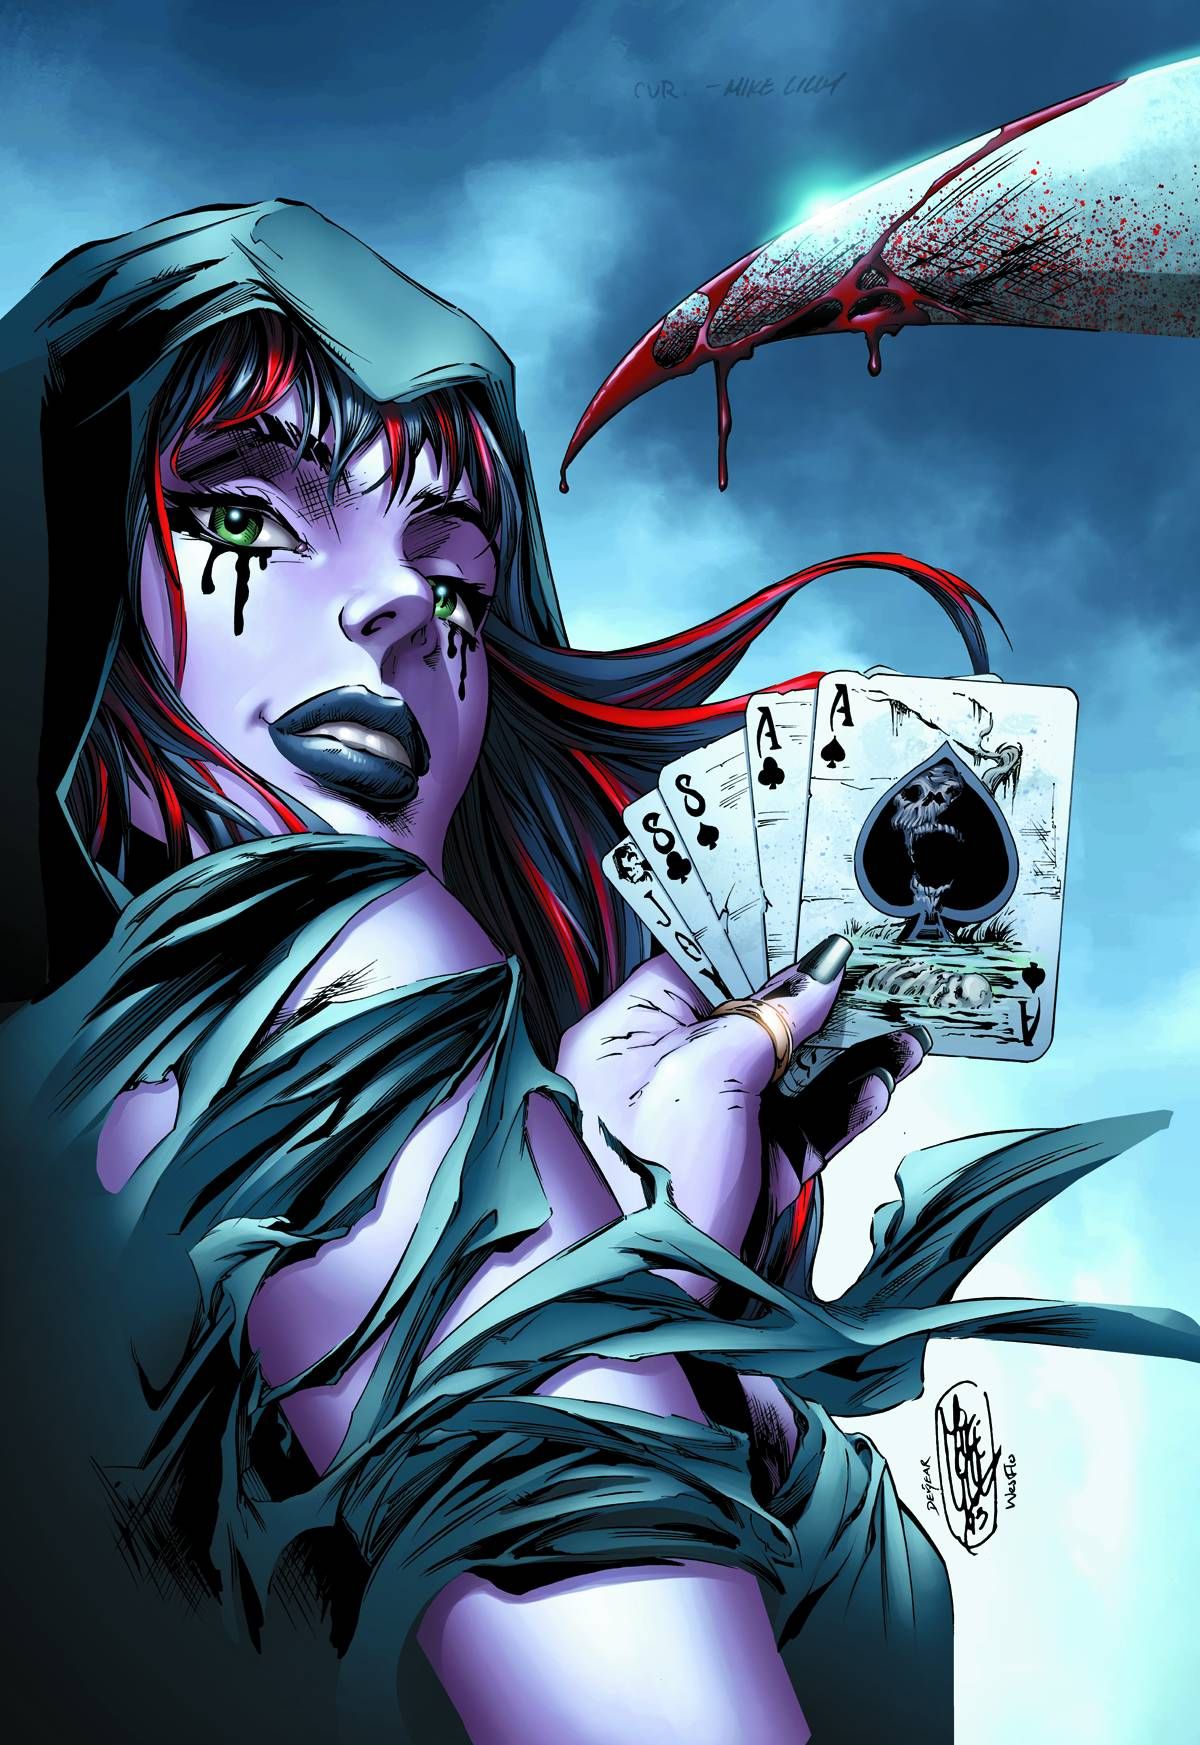 Grimm Fairy Tales presents Wonderland: Through the Looking Glass #4 Comic